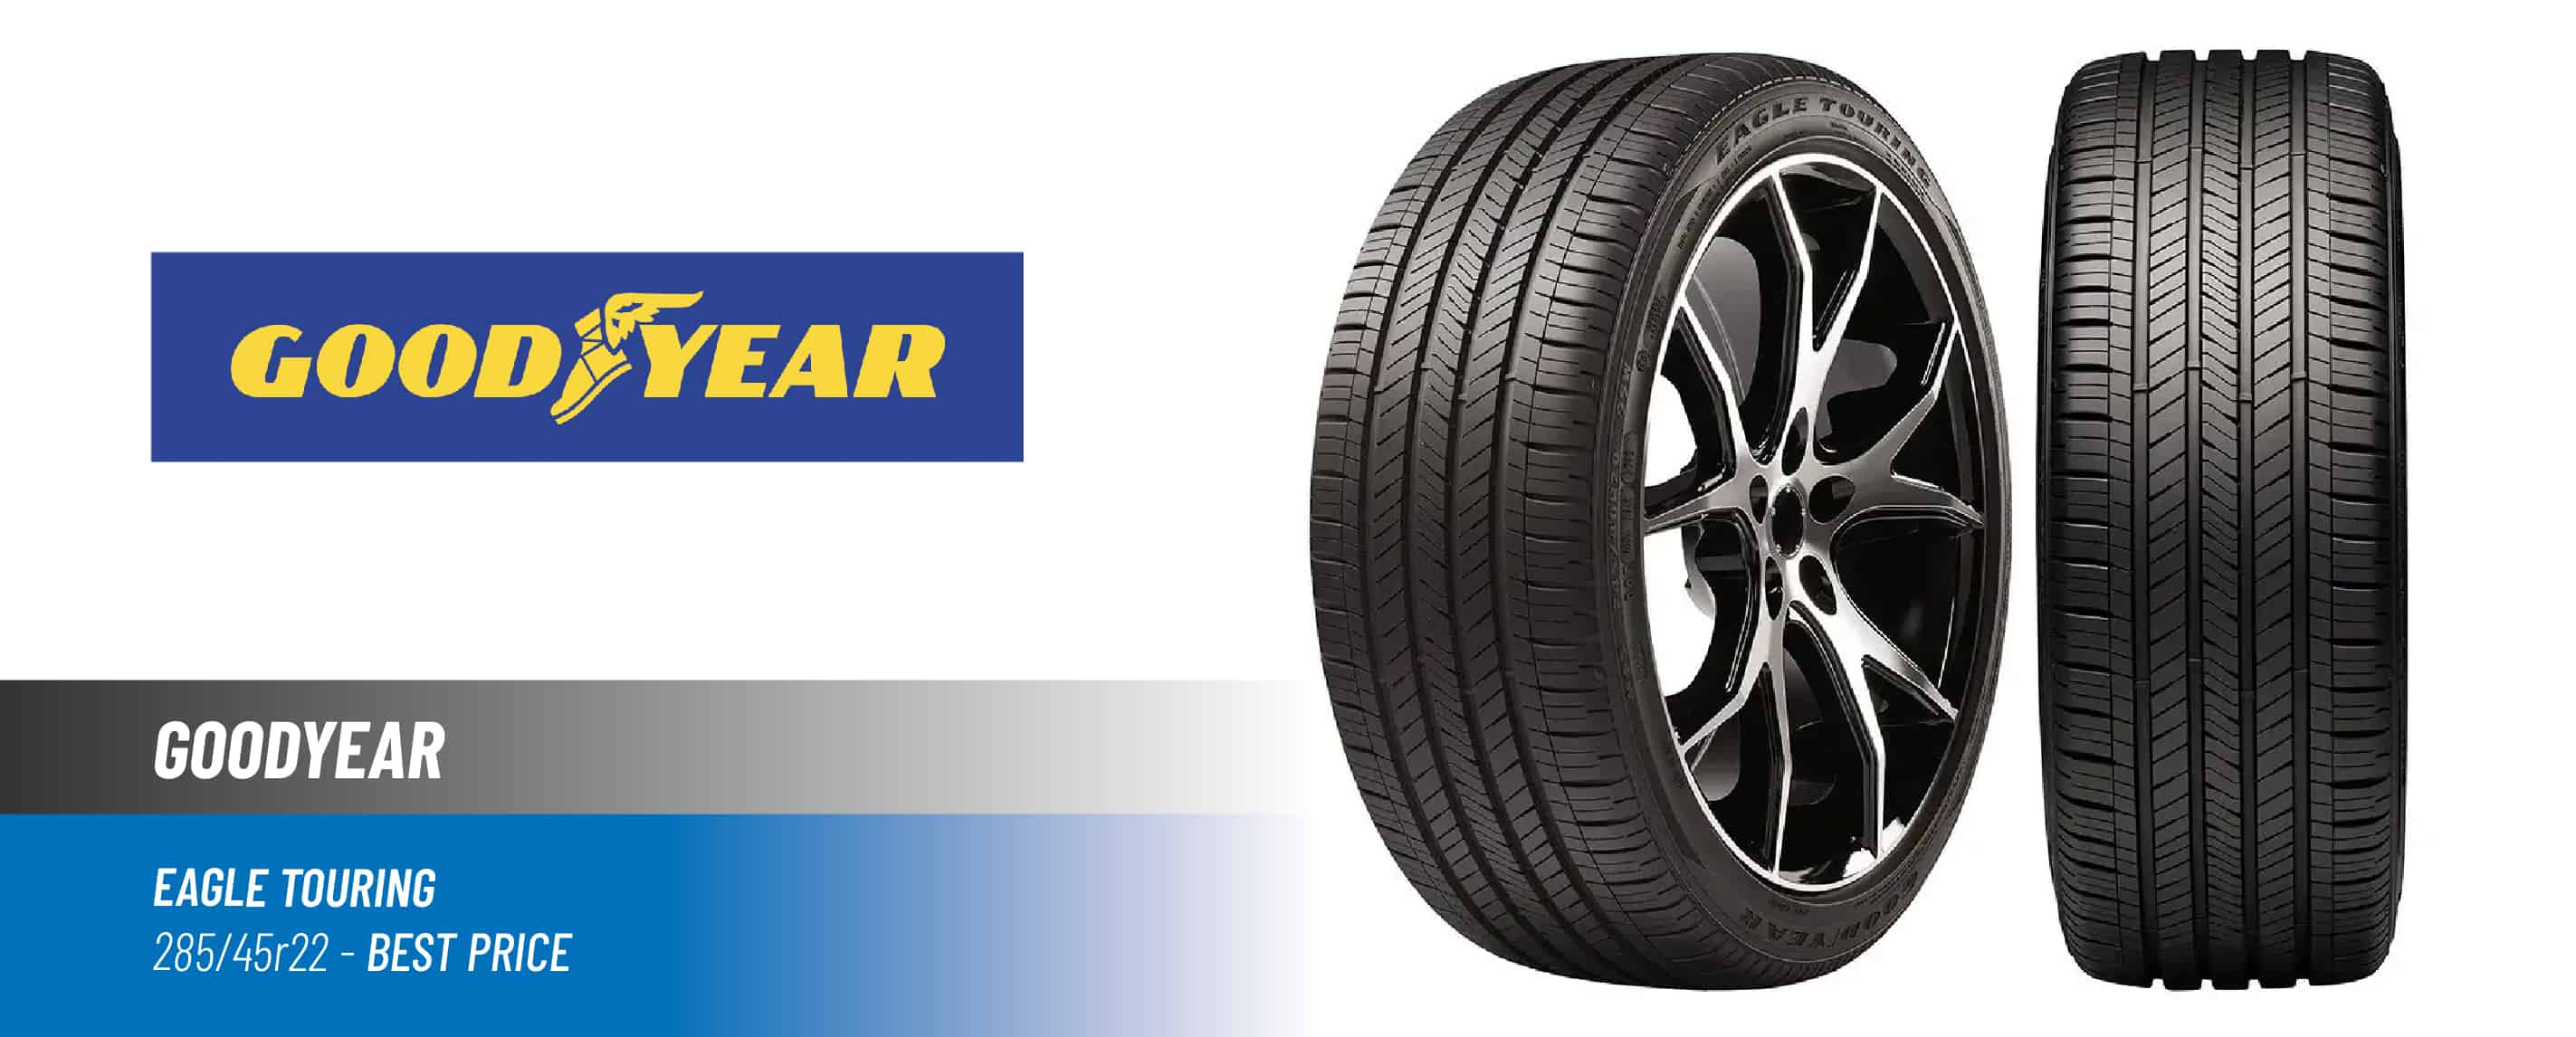 Top#4 Best Price: Goodyear Eagle Touring –best 285/45r22